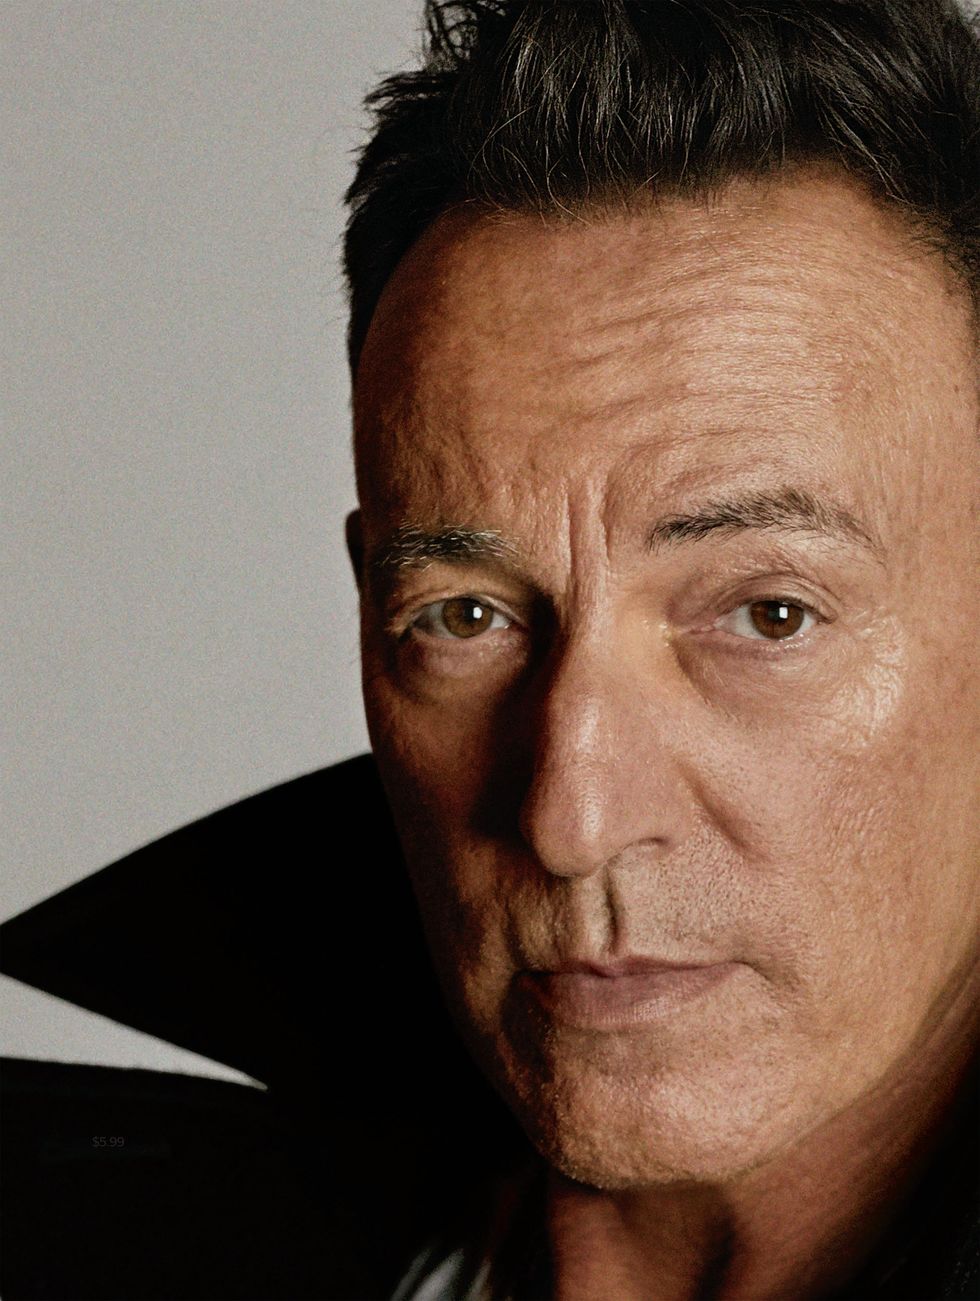 https://hips.hearstapps.com/hmg-prod/images/springsteen-cover-without-cover-lines-1543250937.jpg?crop=1xw:1xh;center,top&resize=980:*